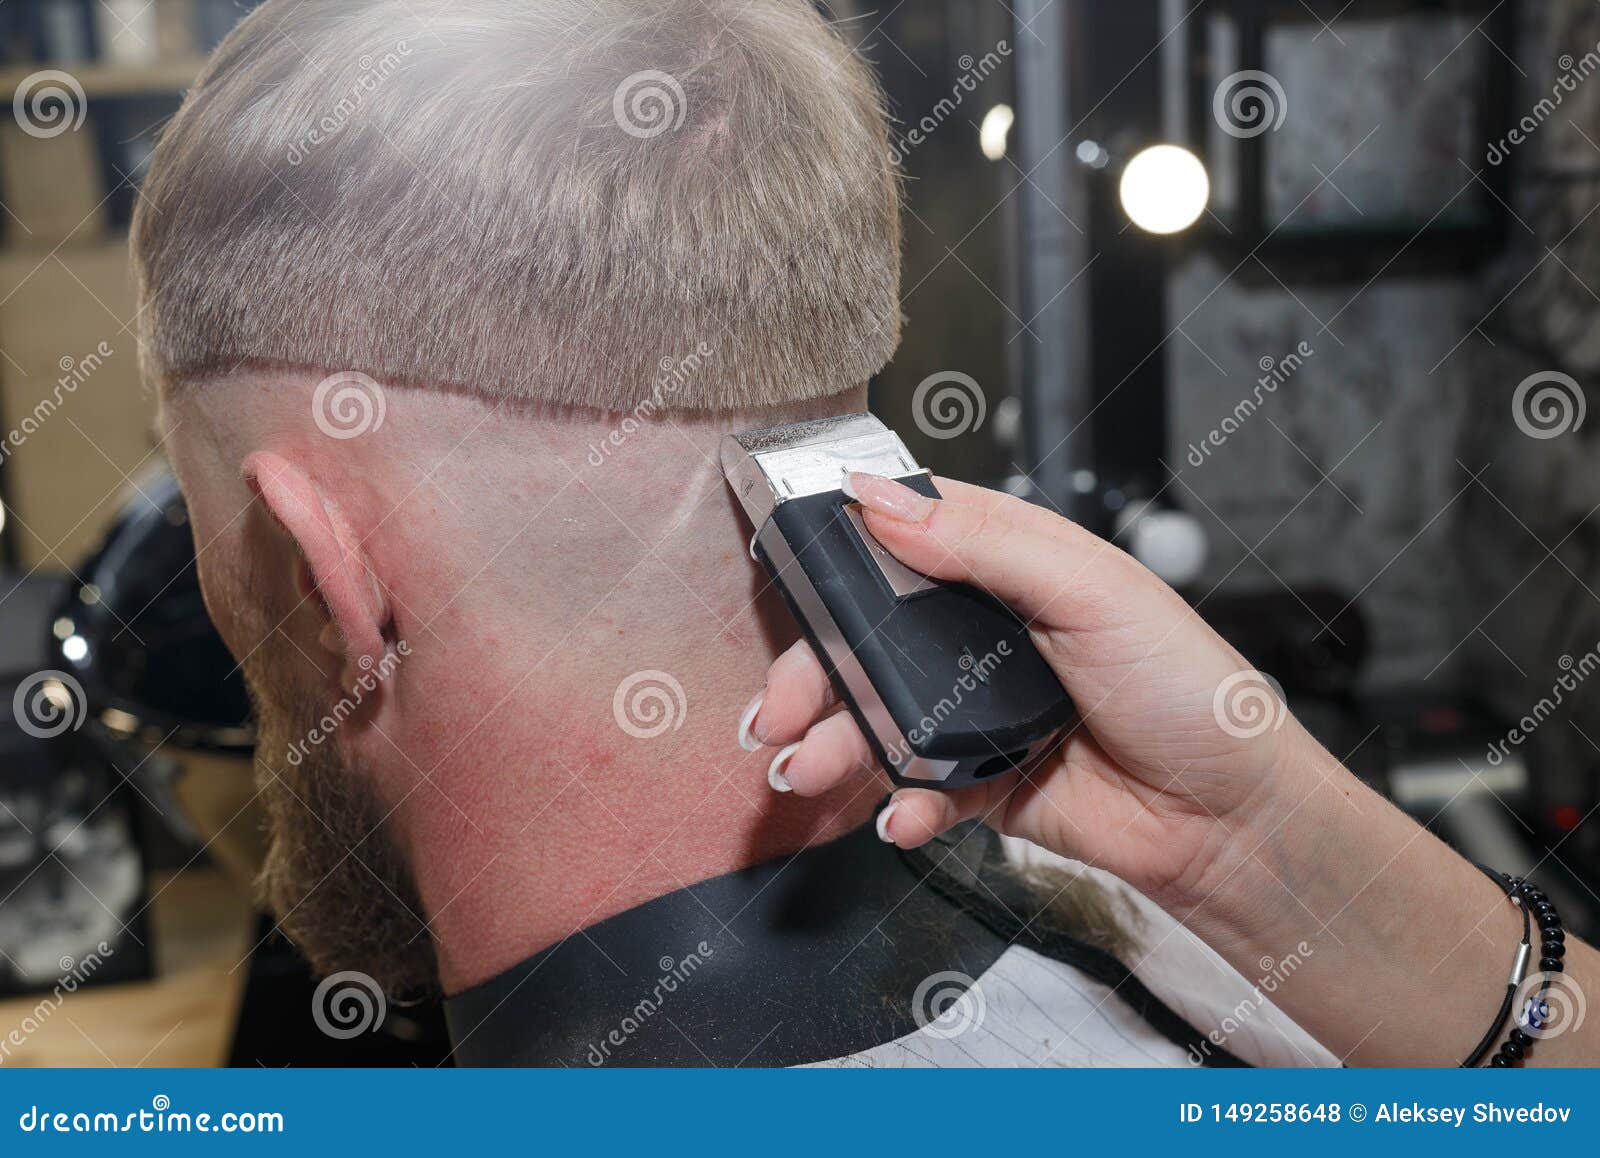 Barber Hair Cutting Machine. the Master Provides a Haircut Stock Photo -  Image of indoor, hand: 149258648